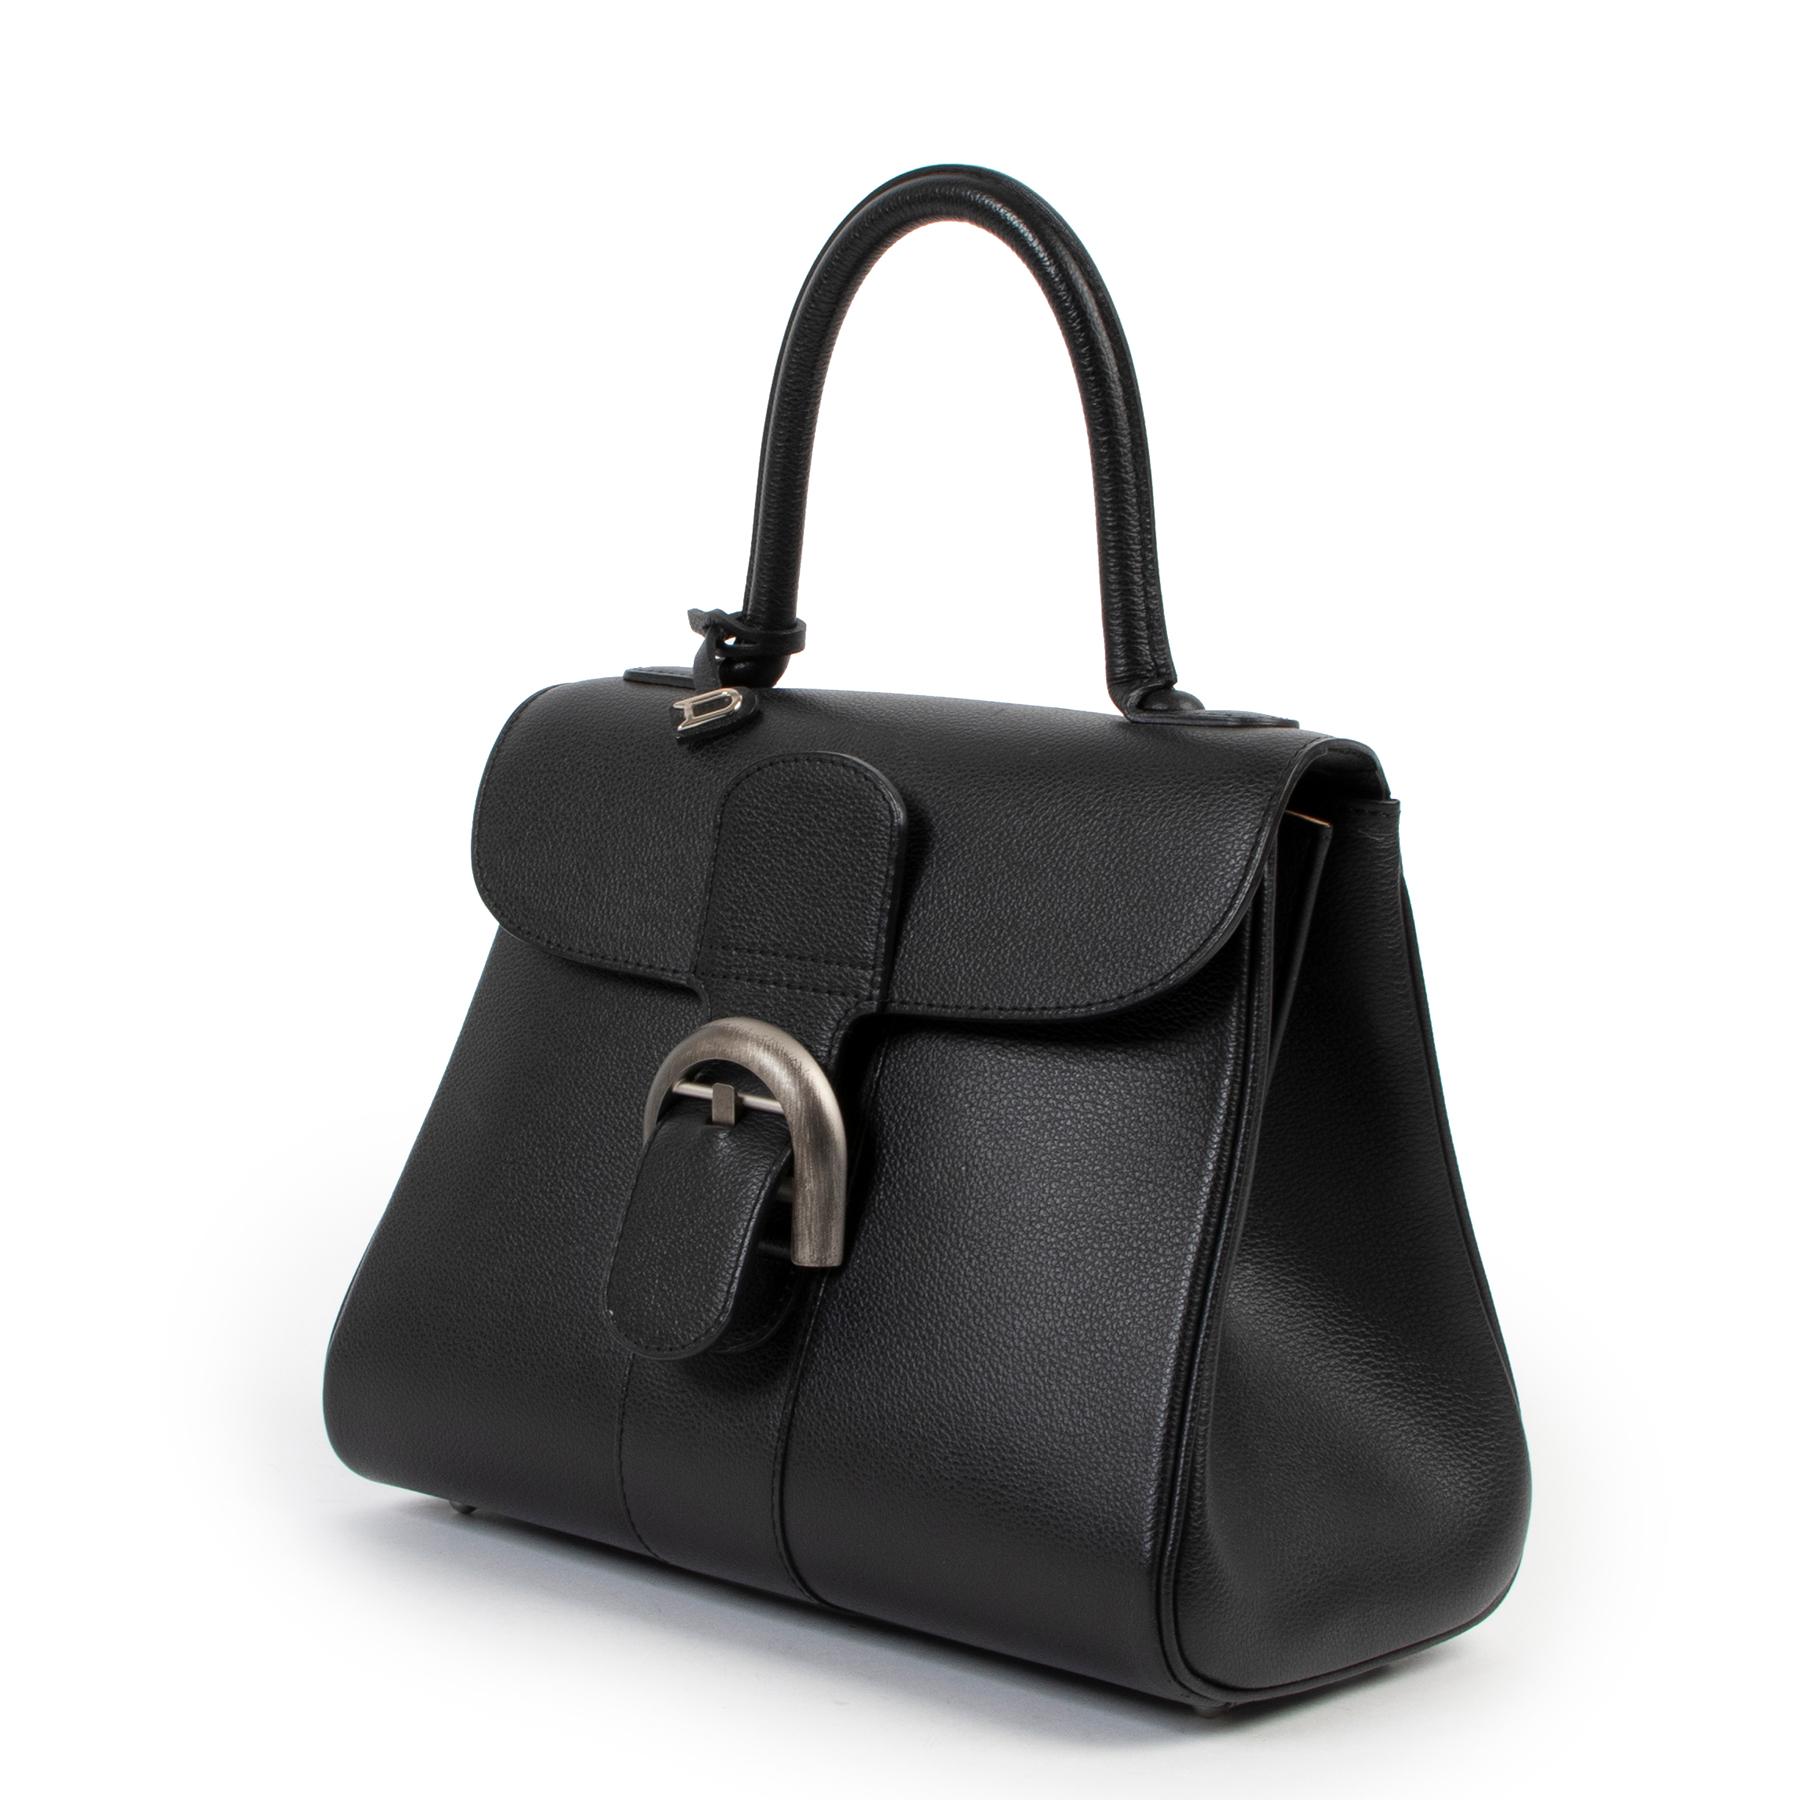 Delvaux Brillant PM Jumping Black Handbag

With the unmistakable shape and the buckle like a gem, the Brillant is the true icon of the house of Delvaux. This elegantly compact PM size in timeless black shows that small is beautiful, enough for all